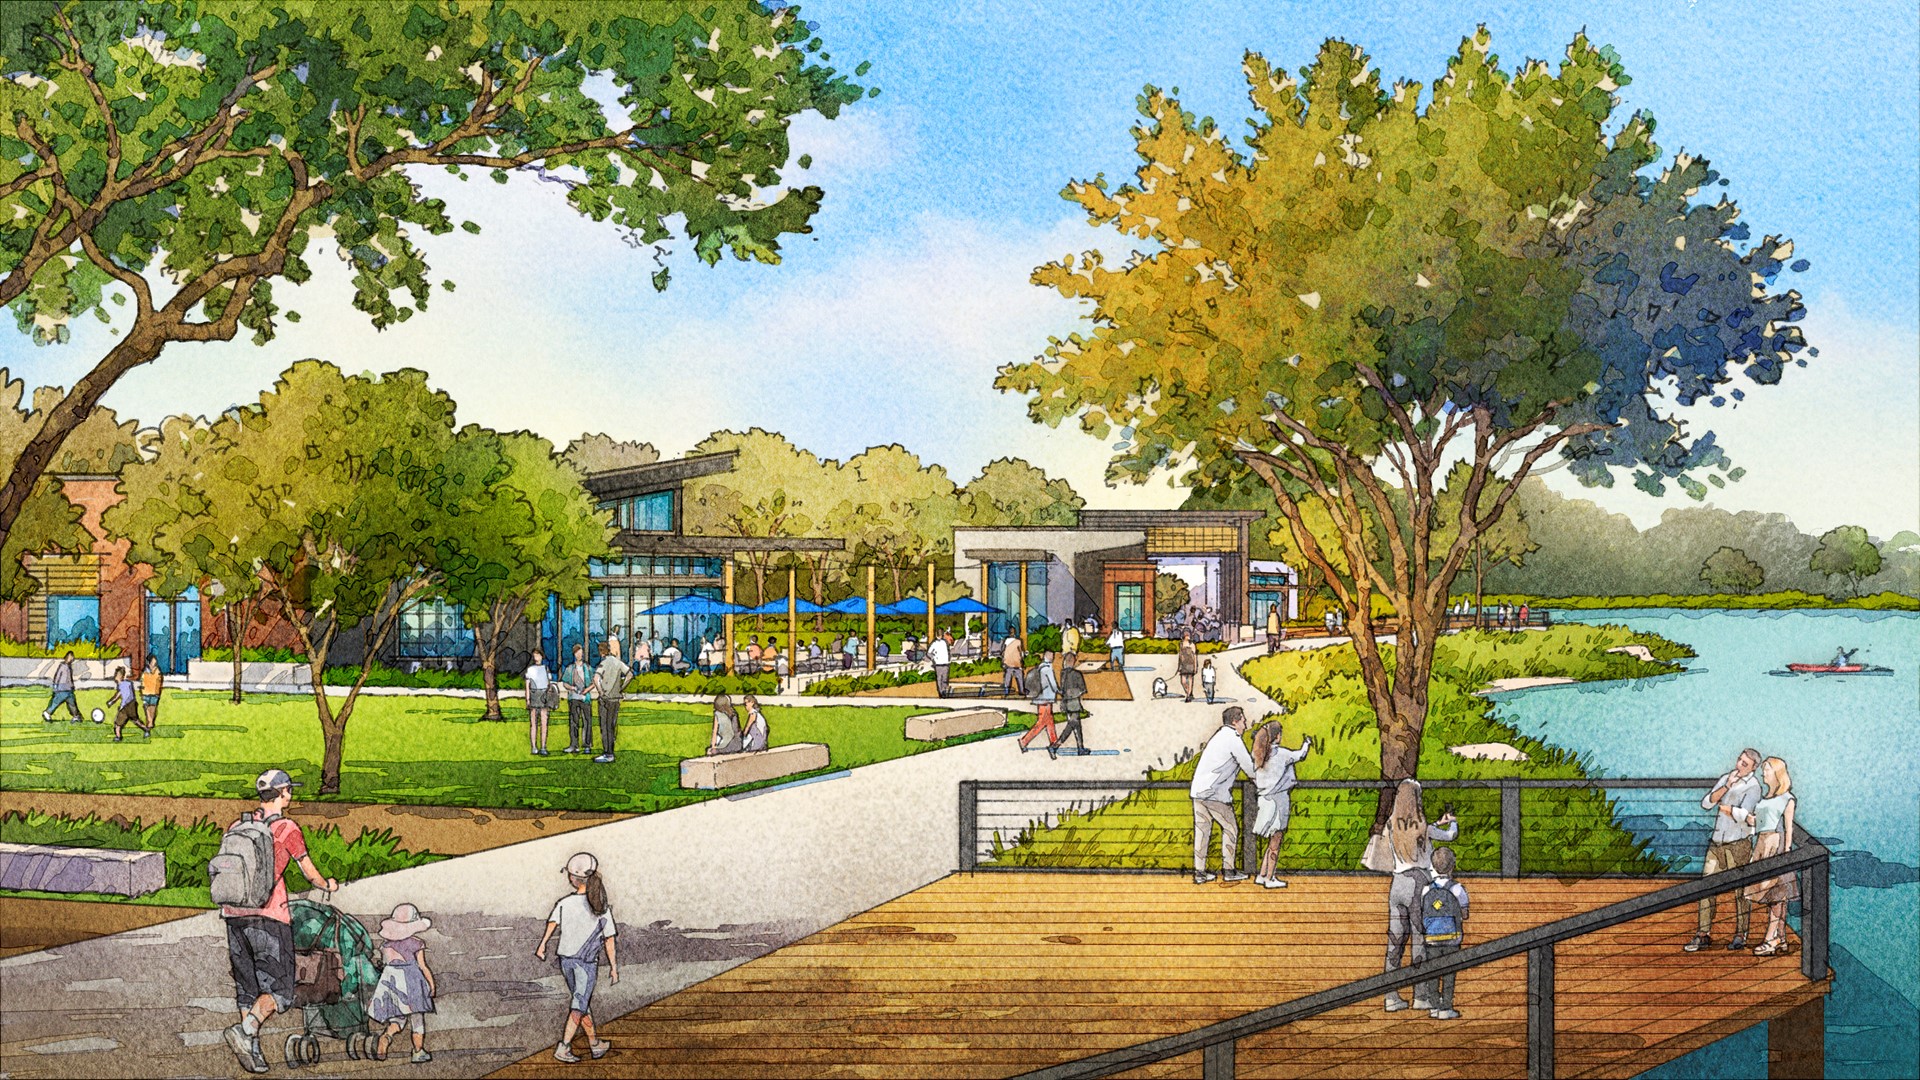 The Preserve at Midland is set to take about 18-24 months until it opens. Until then, look forward to a walking trail, play place, farmer's market and much more.